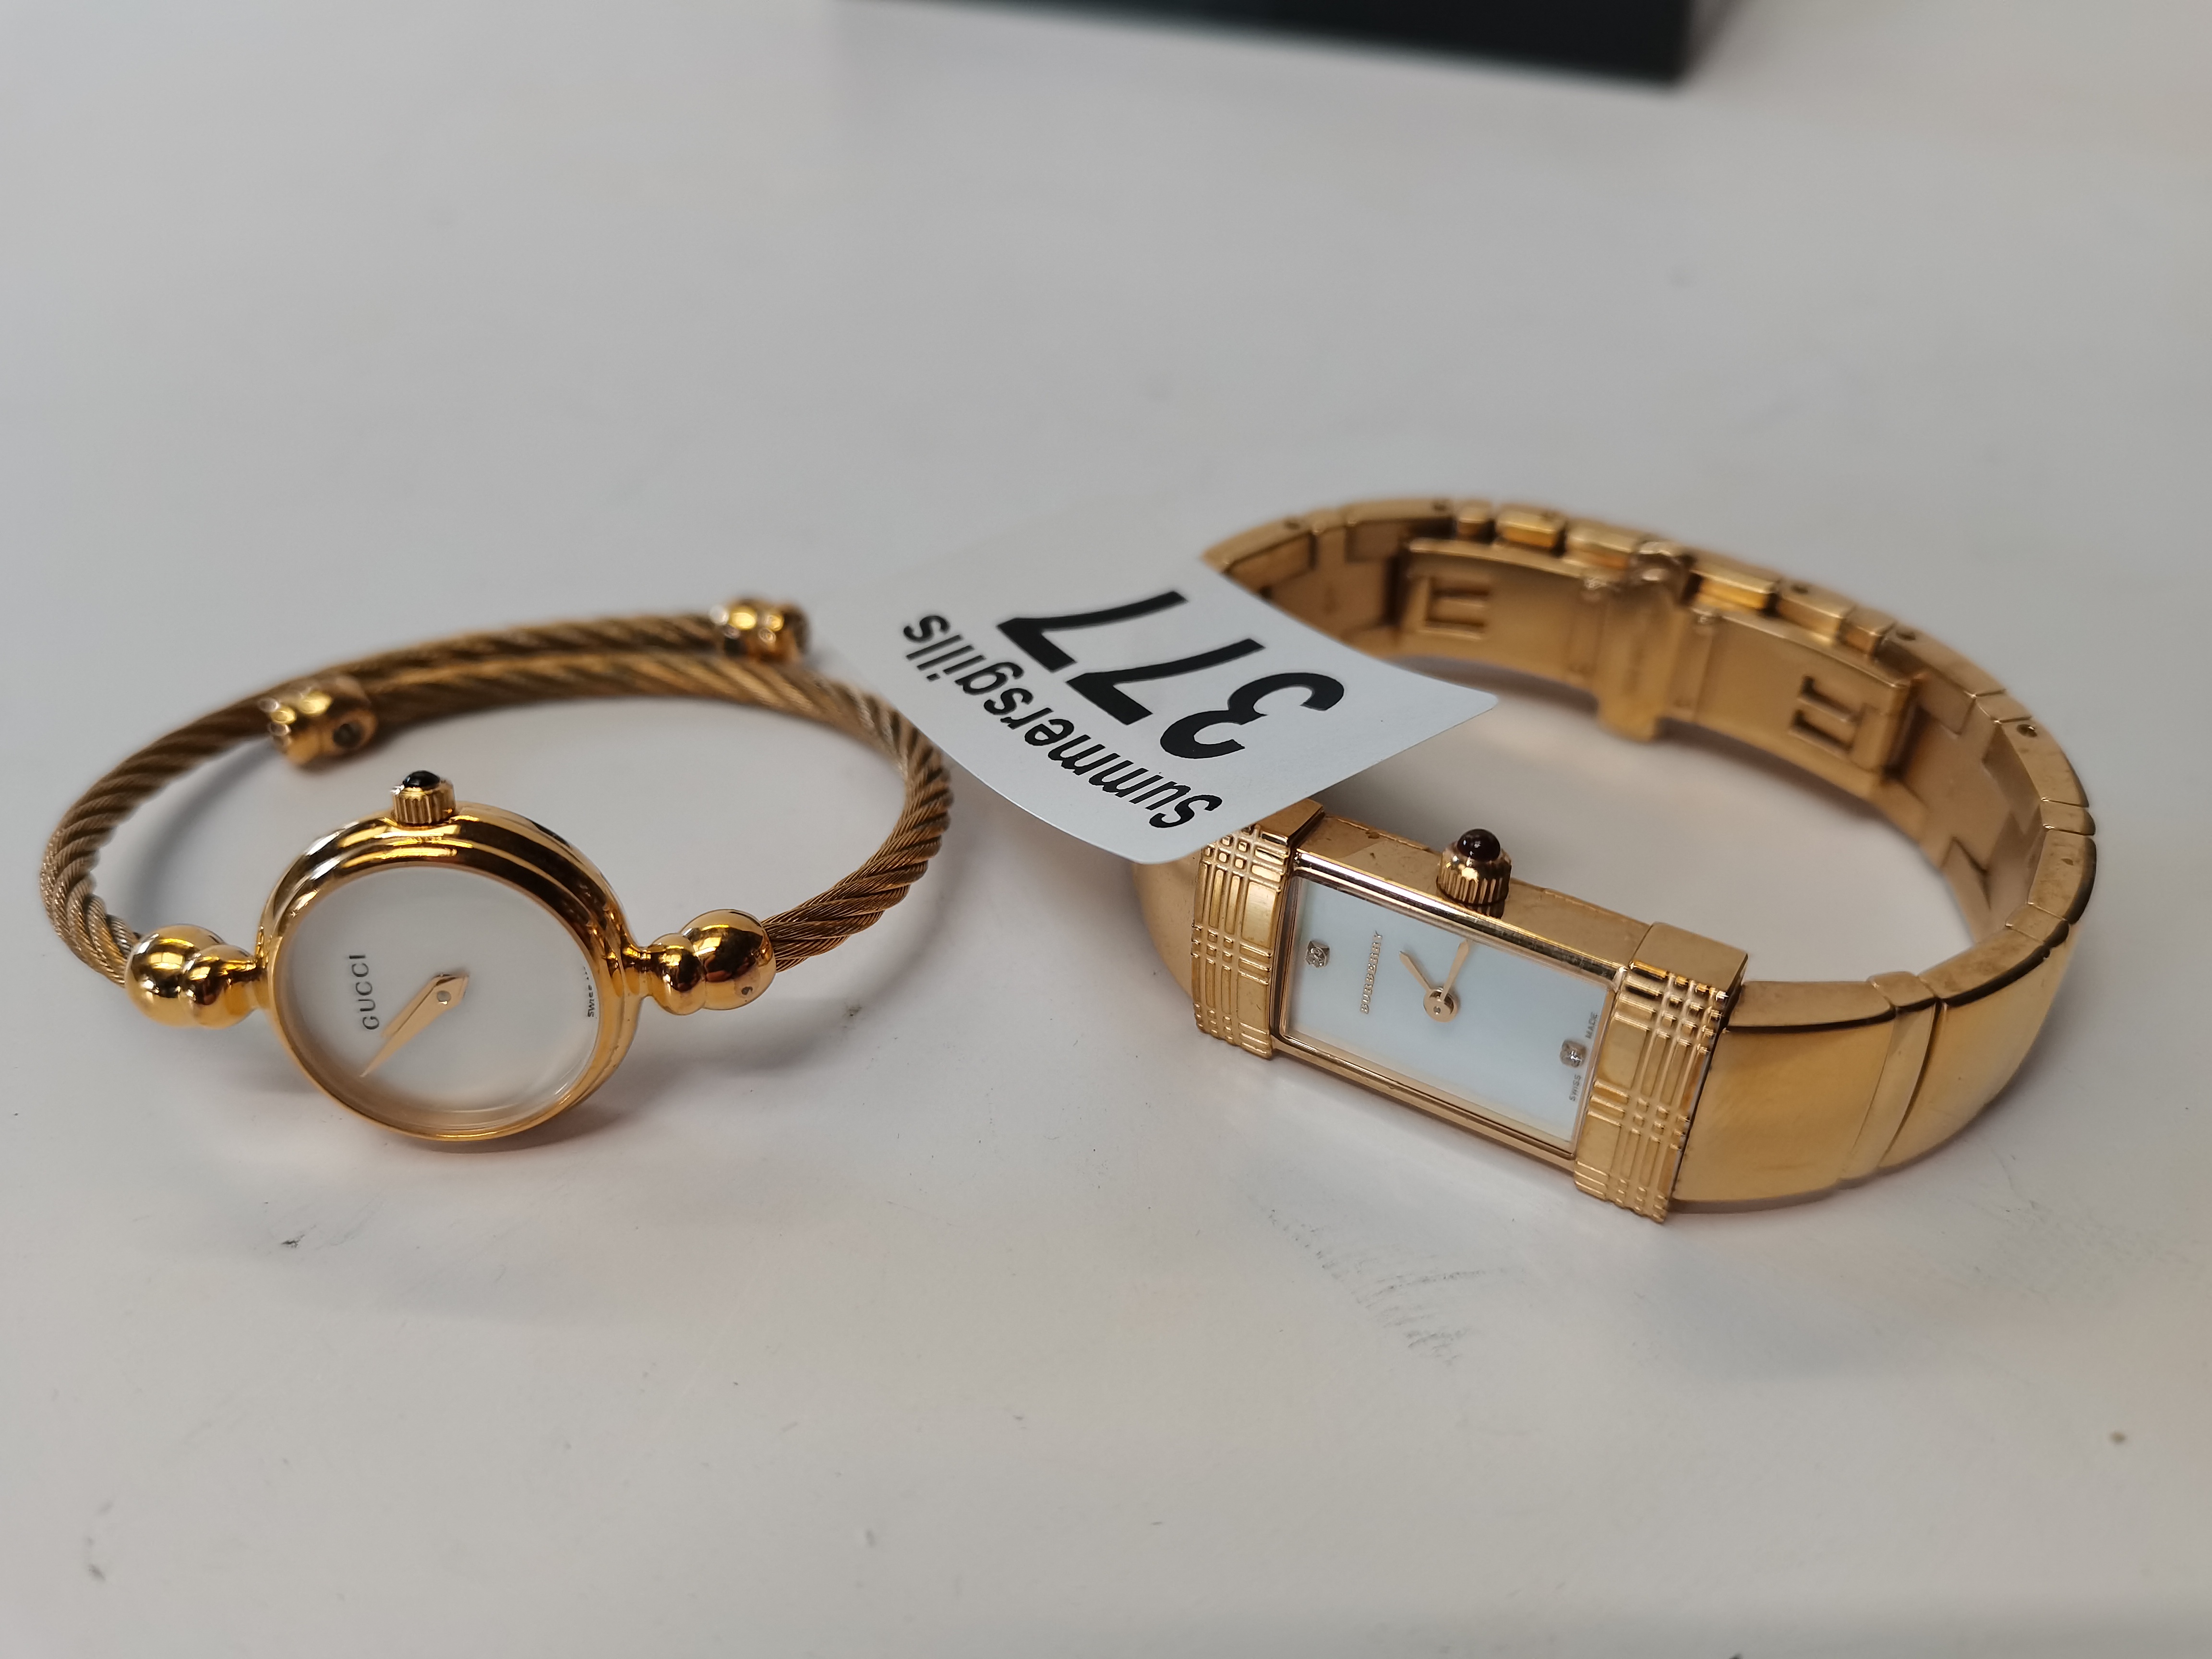 Gucci and Burberry ladies wrist watches